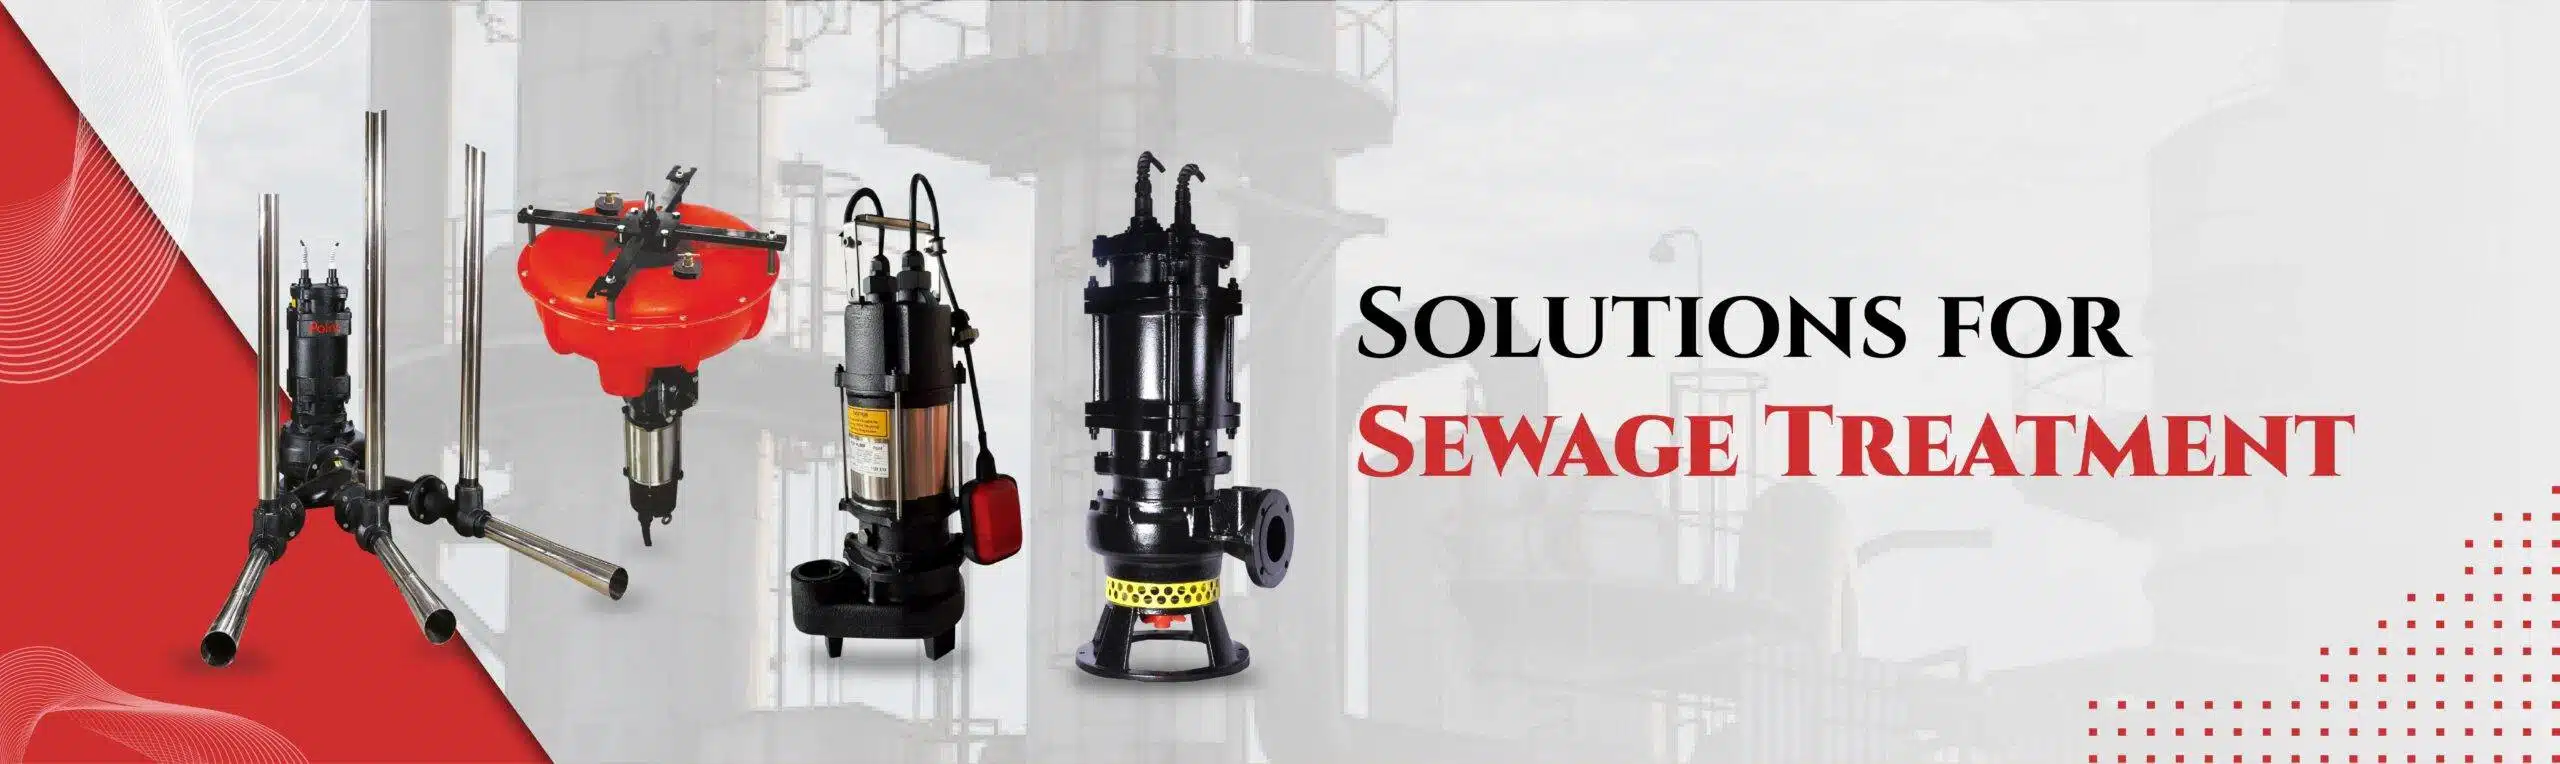 sewage treatment products in india